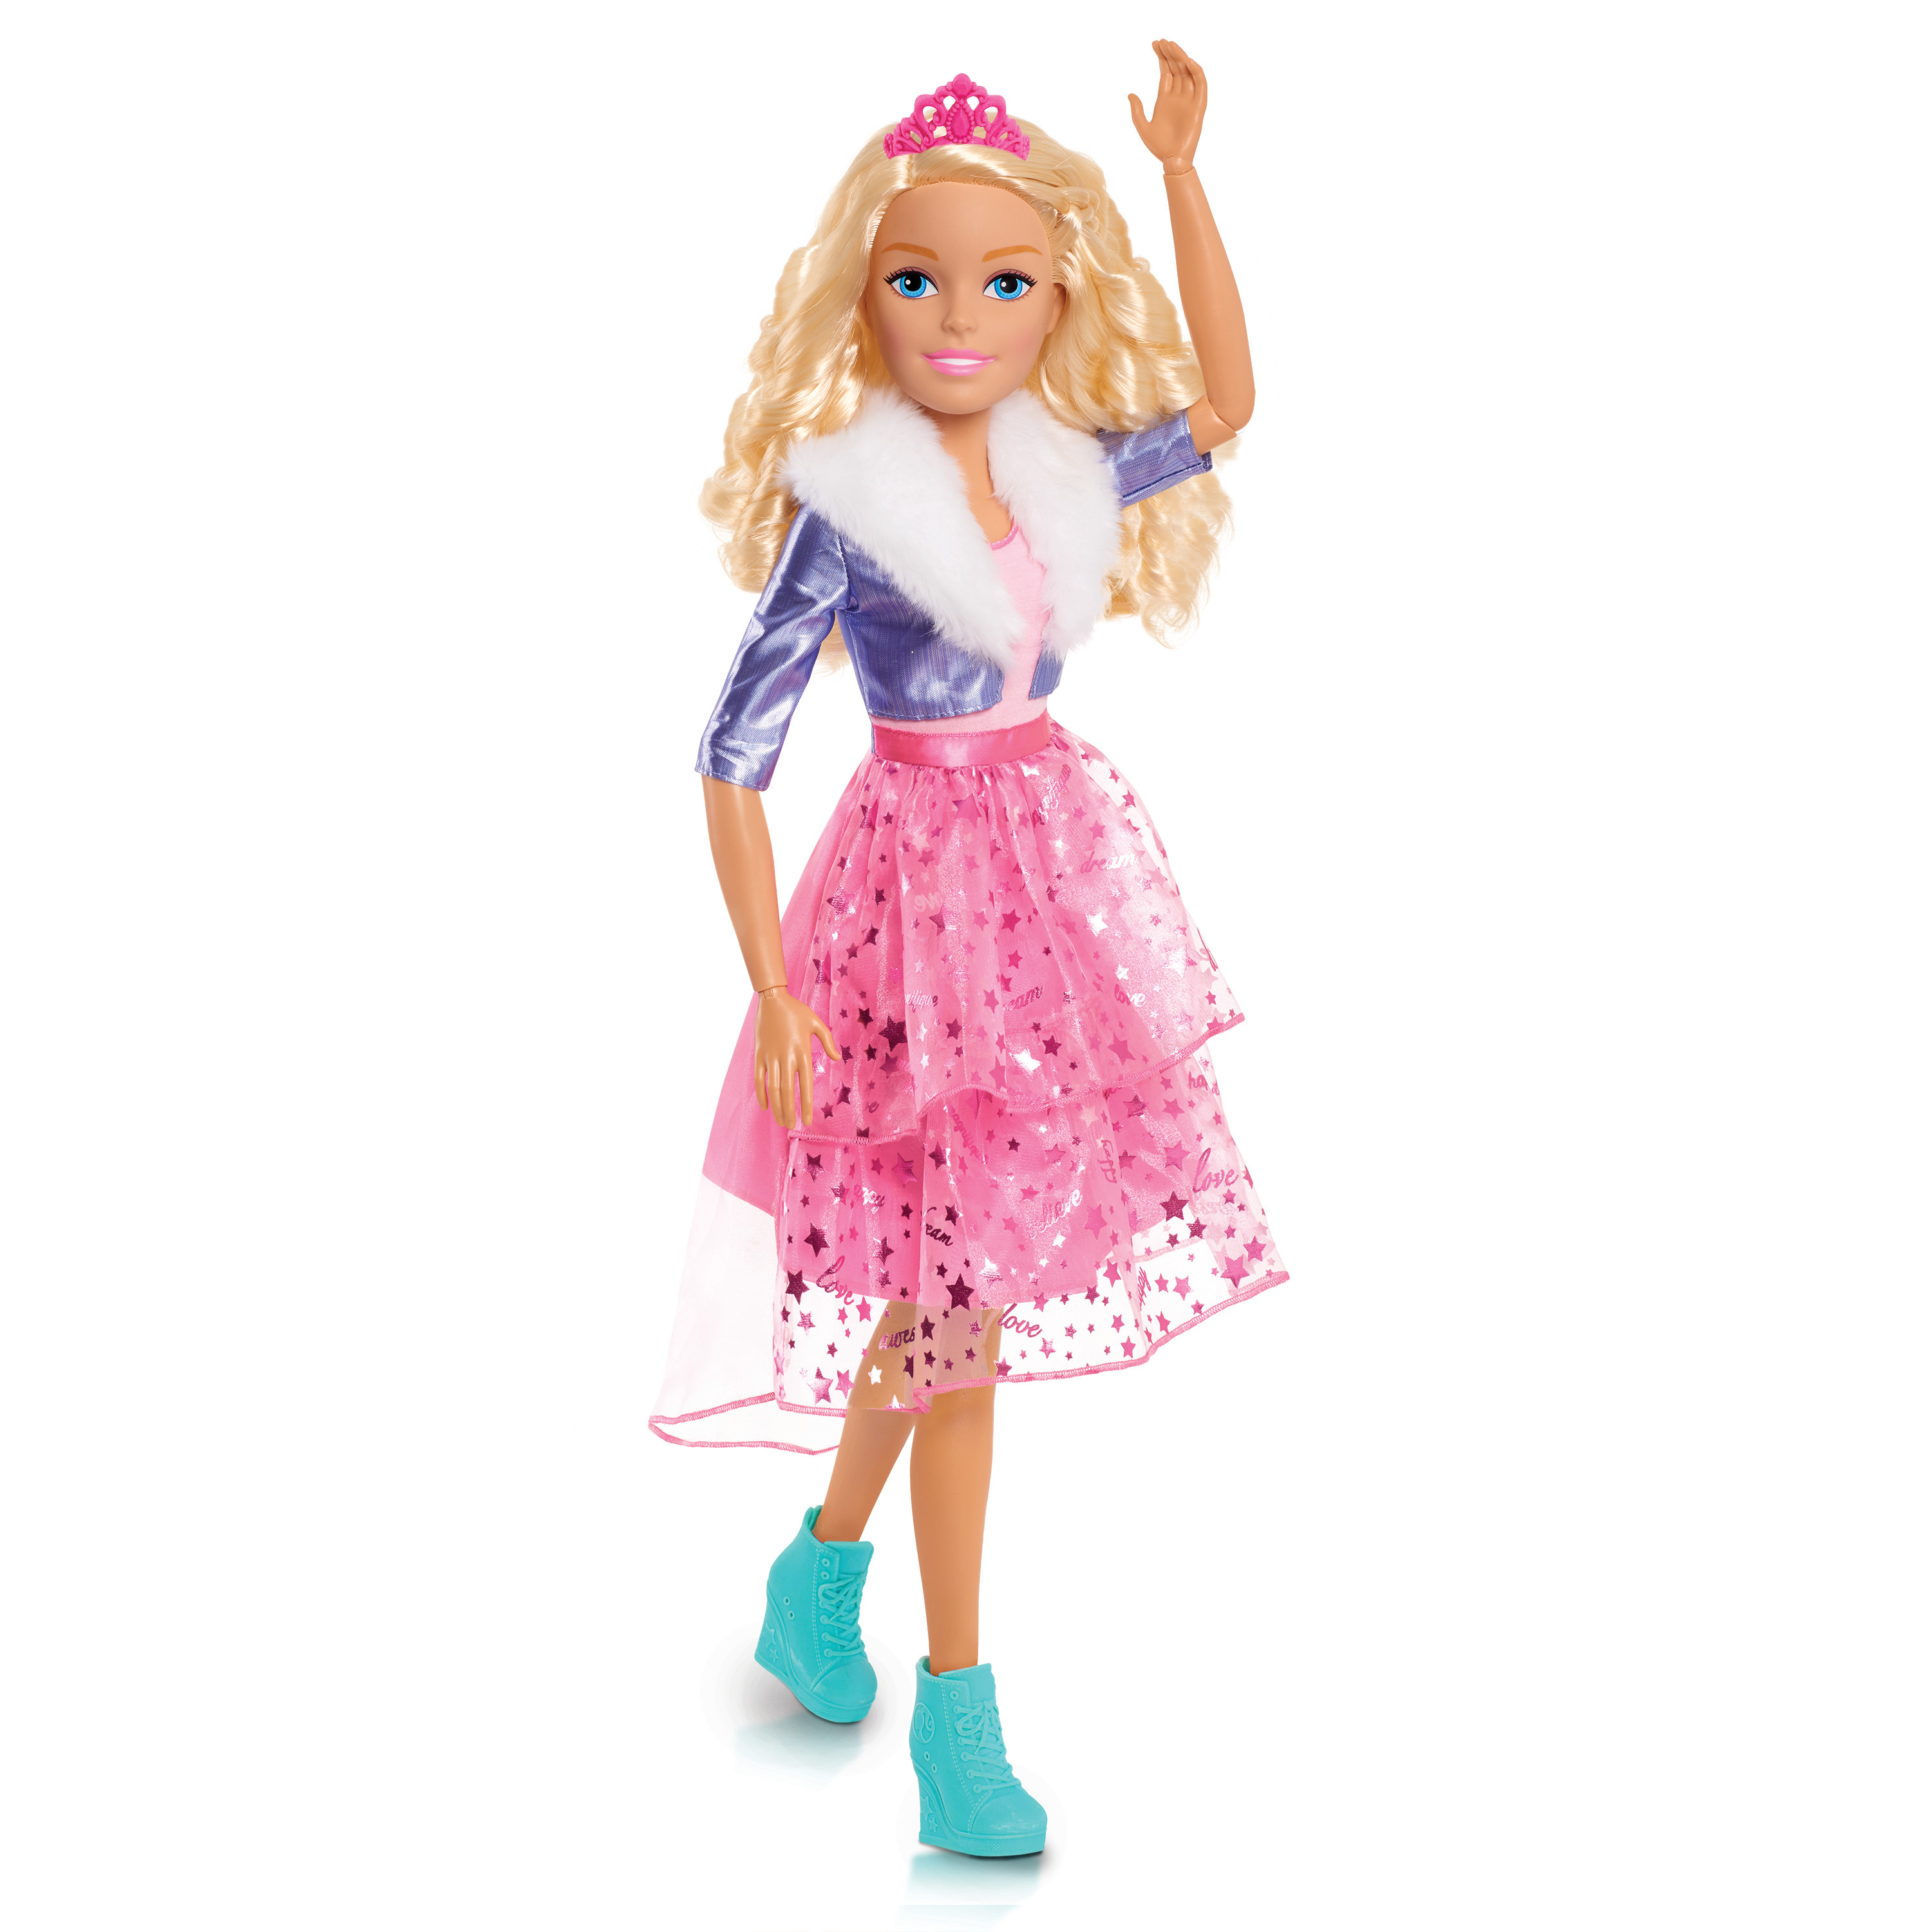 Barbie 28-inch Best Fashion Friend Princess Adventure Doll, Blonde Hair,  Kids Toys for Ages 3 Up, Gifts and Presents - image 2 of 2